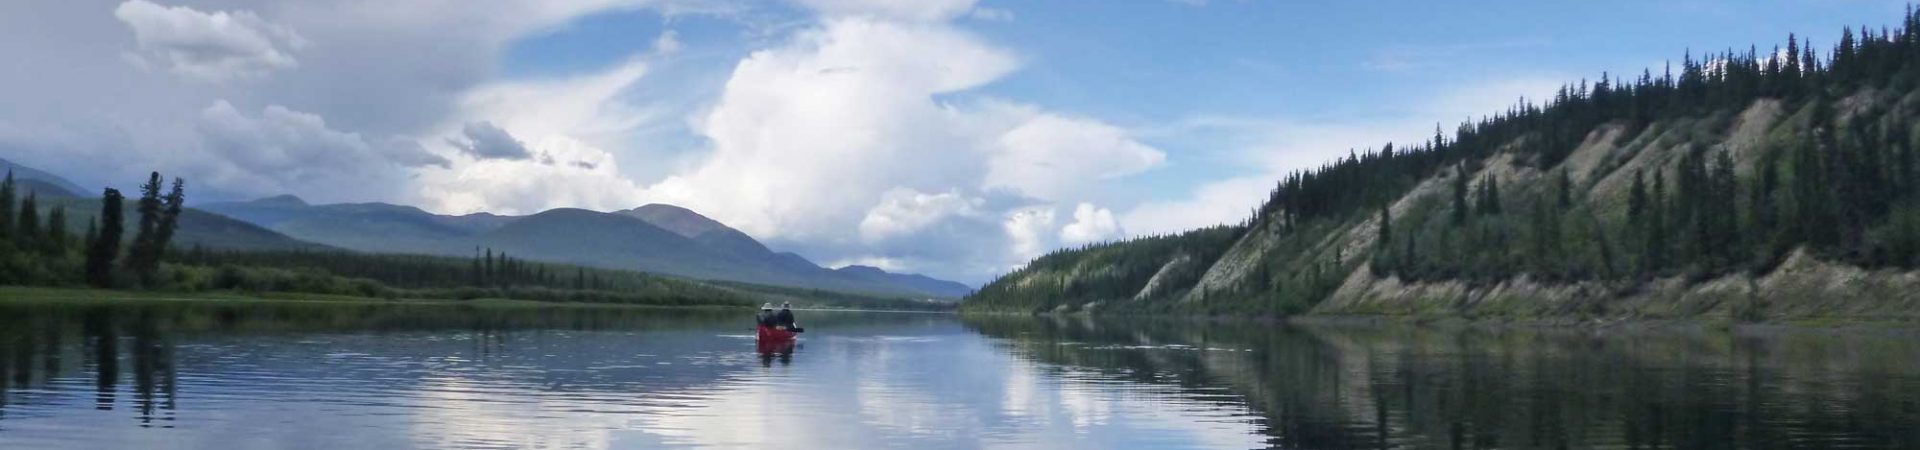 A Northern Wilderness Adventure-Alaska to British Columbia on the Chilkoot Trail